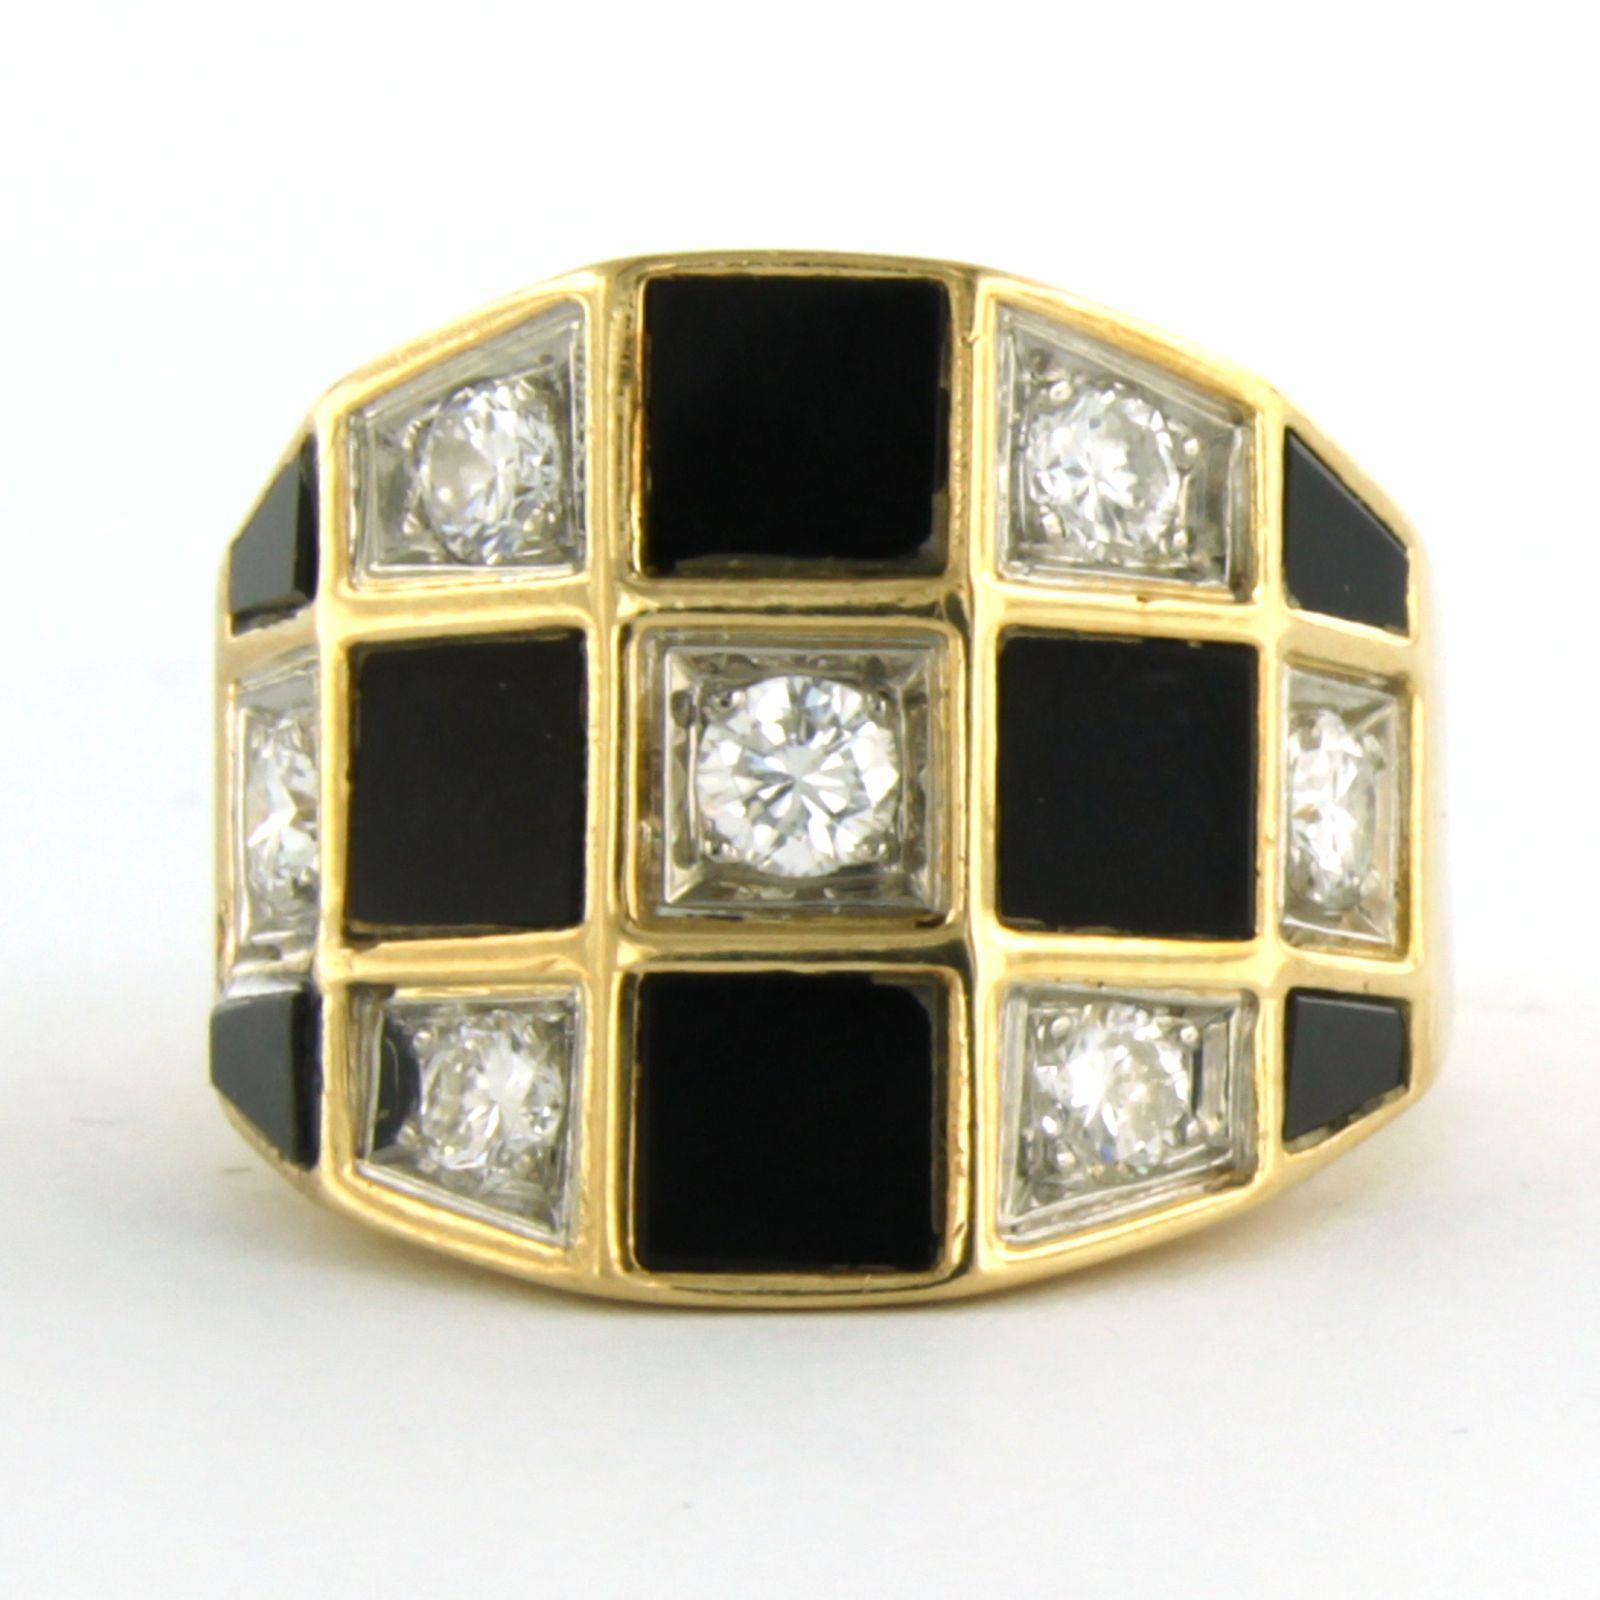 18k bicolour gold ring set with onyx and brilliant cut diamonds. 0.60ct – F/G – VS/SI – ring size U.S. 6 – EU. 16.5(52)

detailed description:

The top of the ring is in a rectangle shape 1.6 cm wide by 4.5 mm high

Ring size US 6 – EU. 16.5(52),